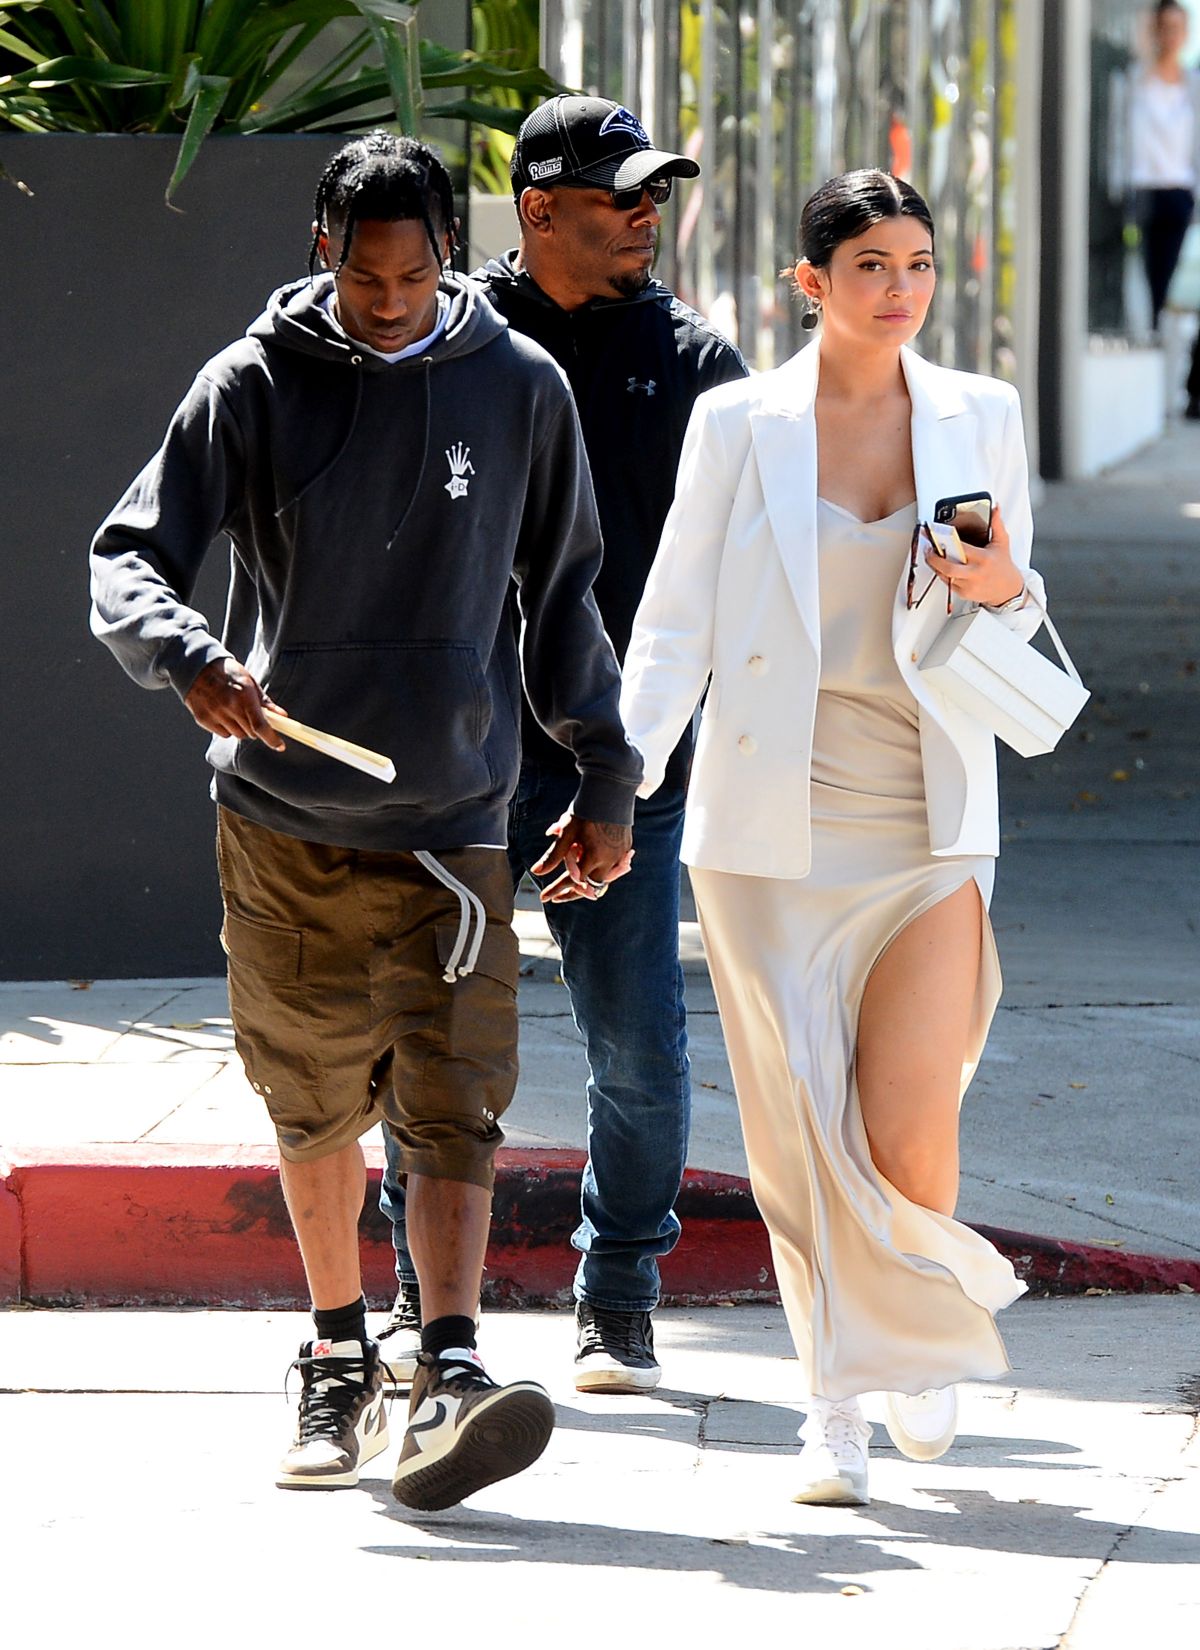 kylie-jenner-and-travis-scott-out-shopping-in-west-hollywood-04-22-2019-5.jpg